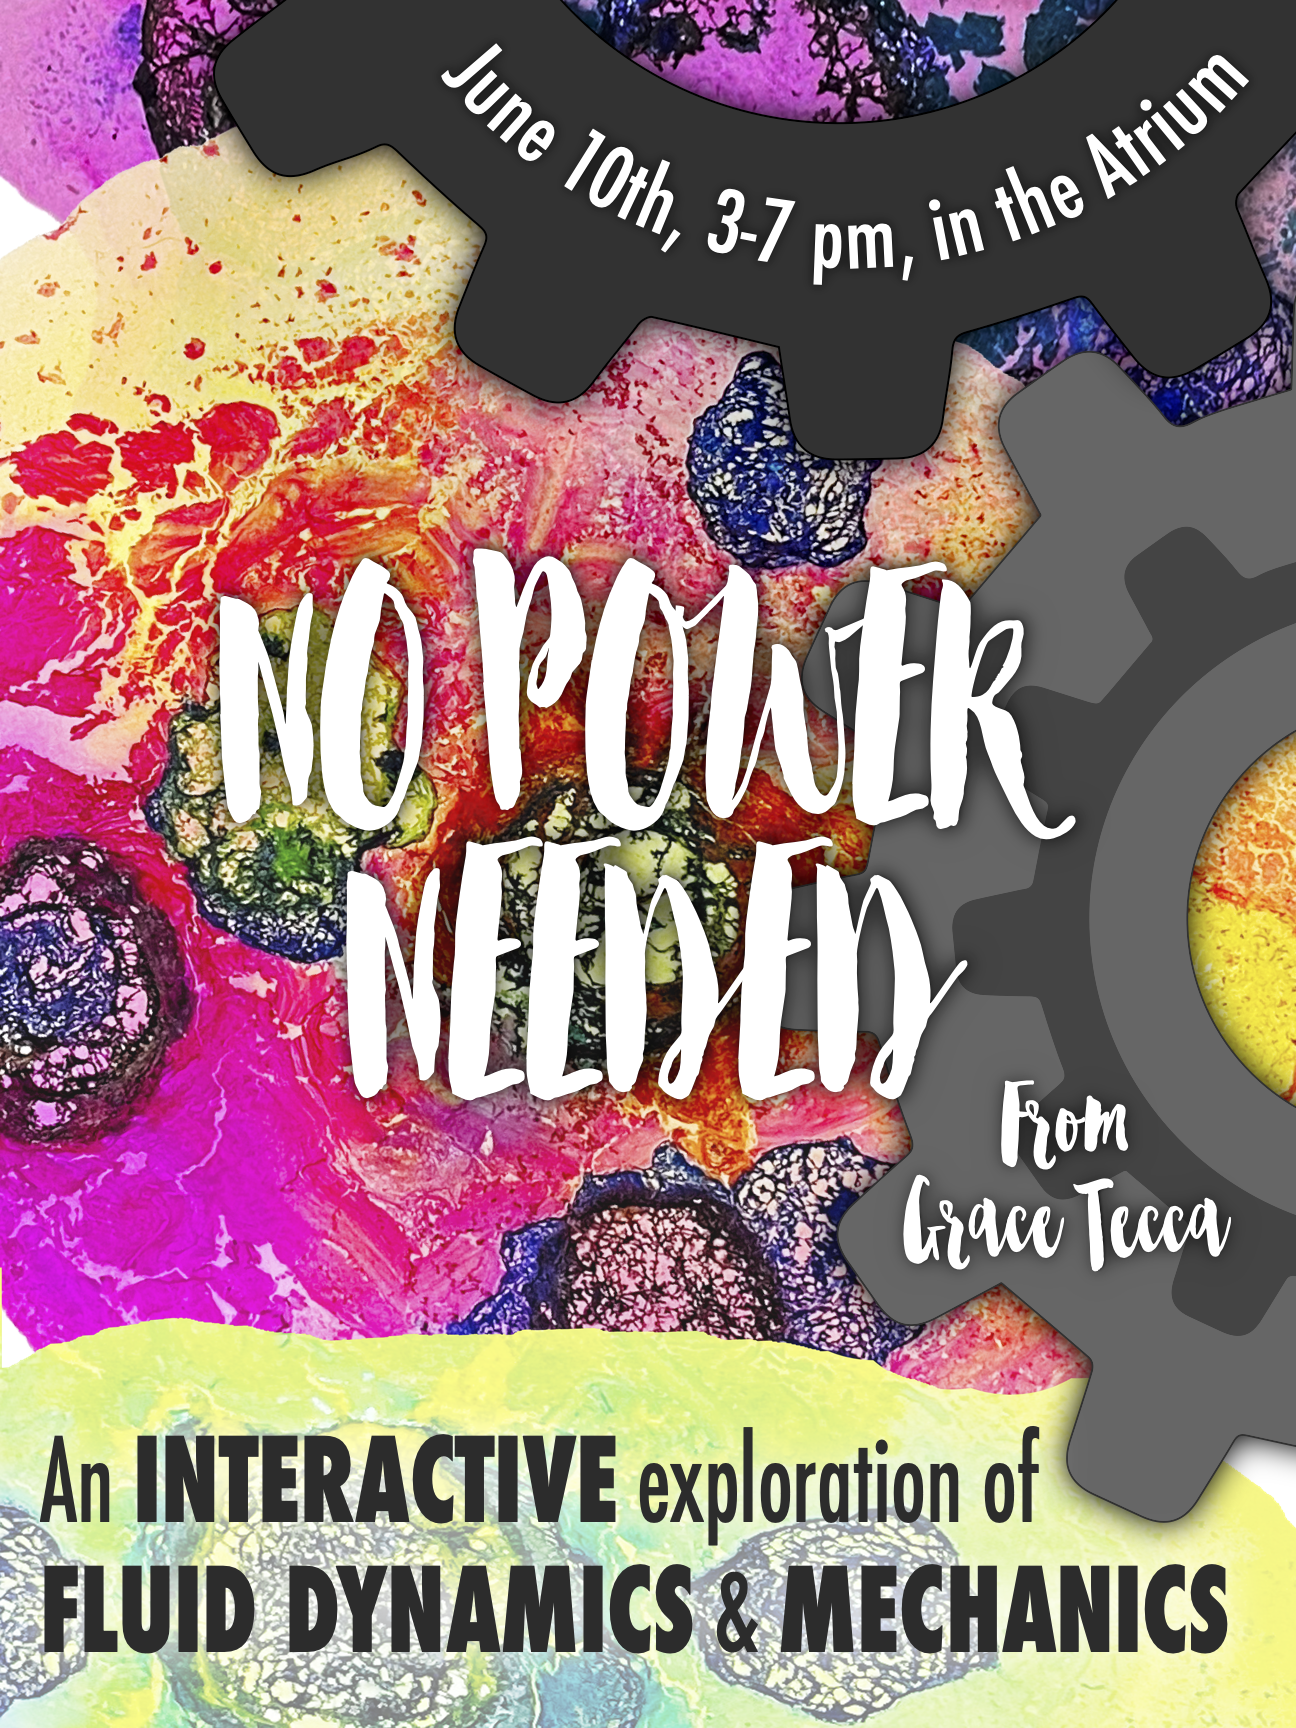 No Power Needed from Grace Tecca in white text over multi-color background with black and grey gears; An Interactive Exploration of Fluid Dynamics & Mechanics in grey text